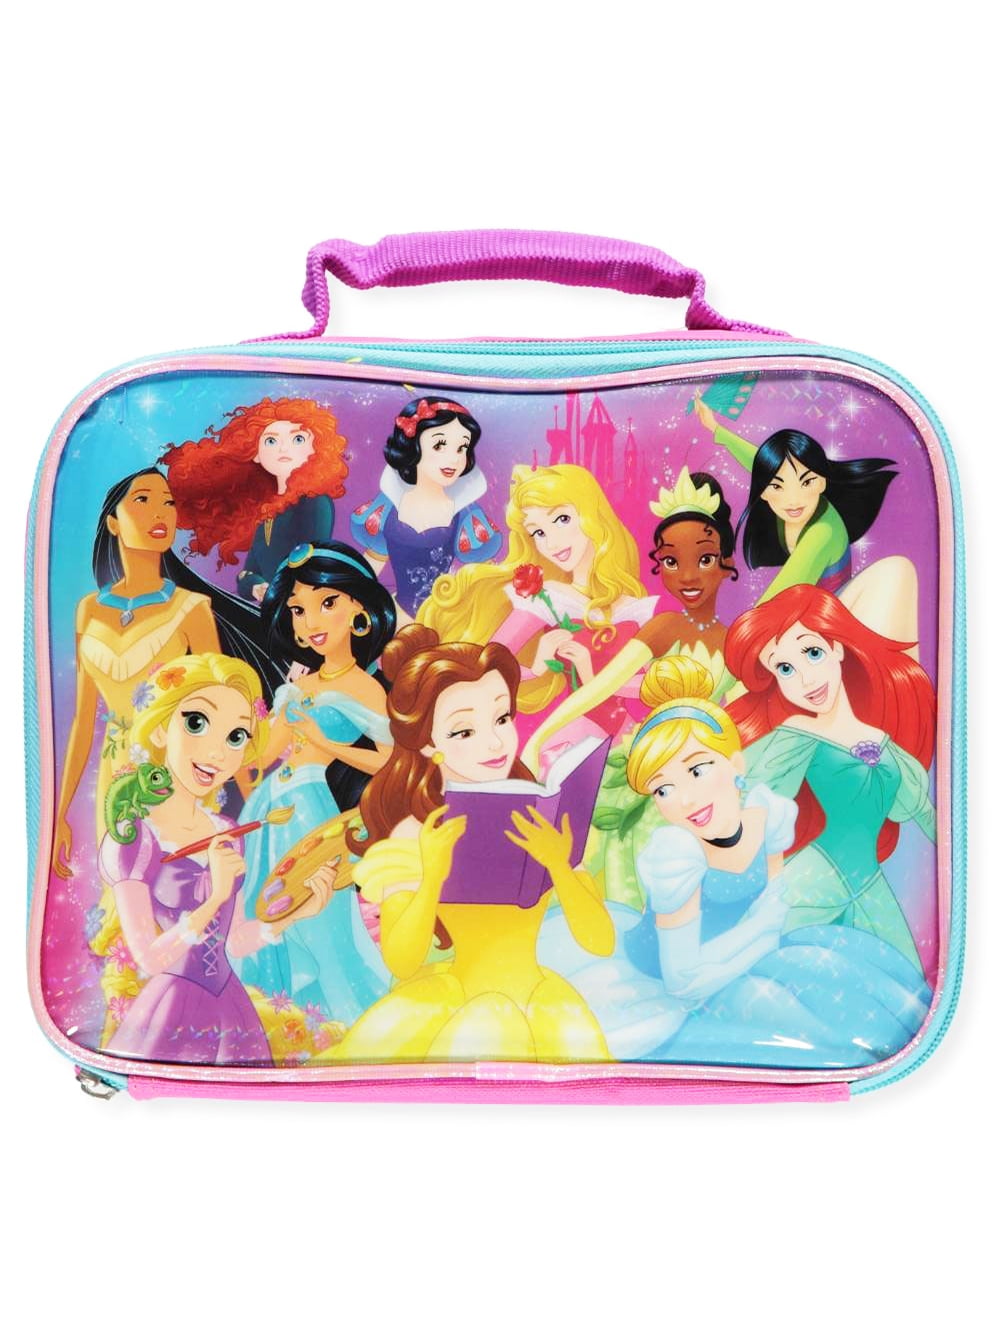 Disney Girls All of the Princesses Soft Lunch Box (Pink One Size ...